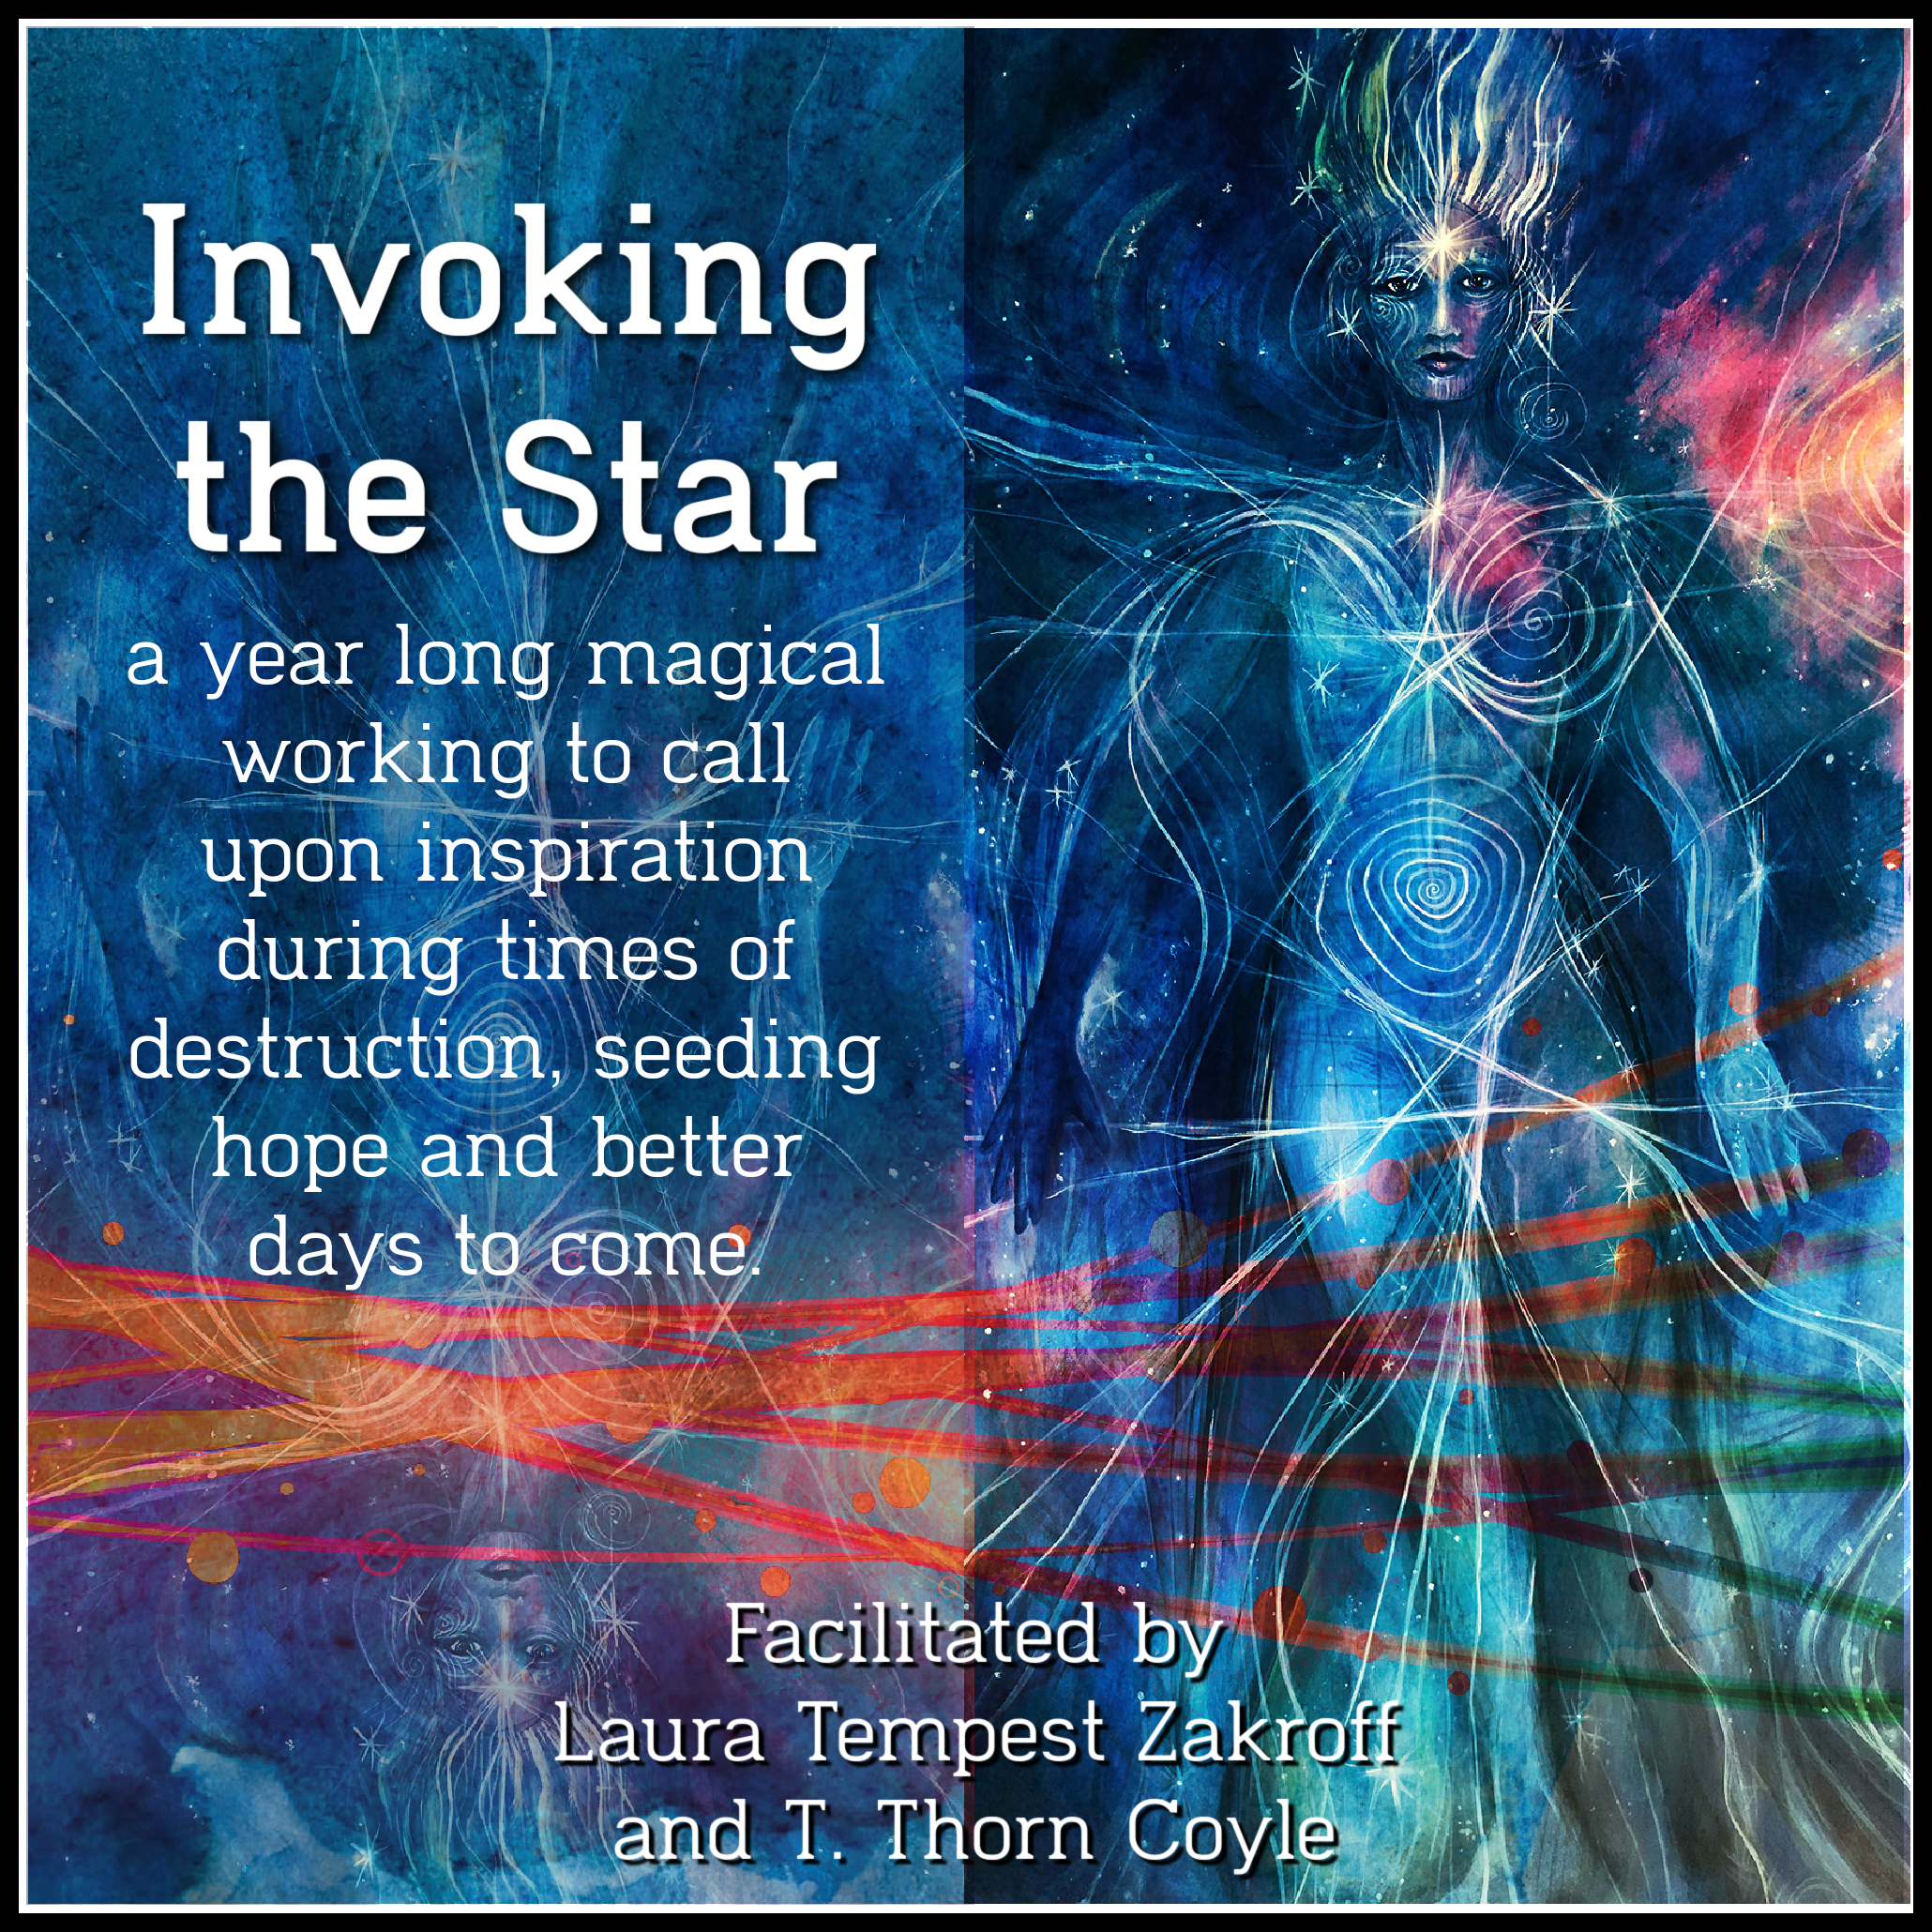 Square_ invoking the star